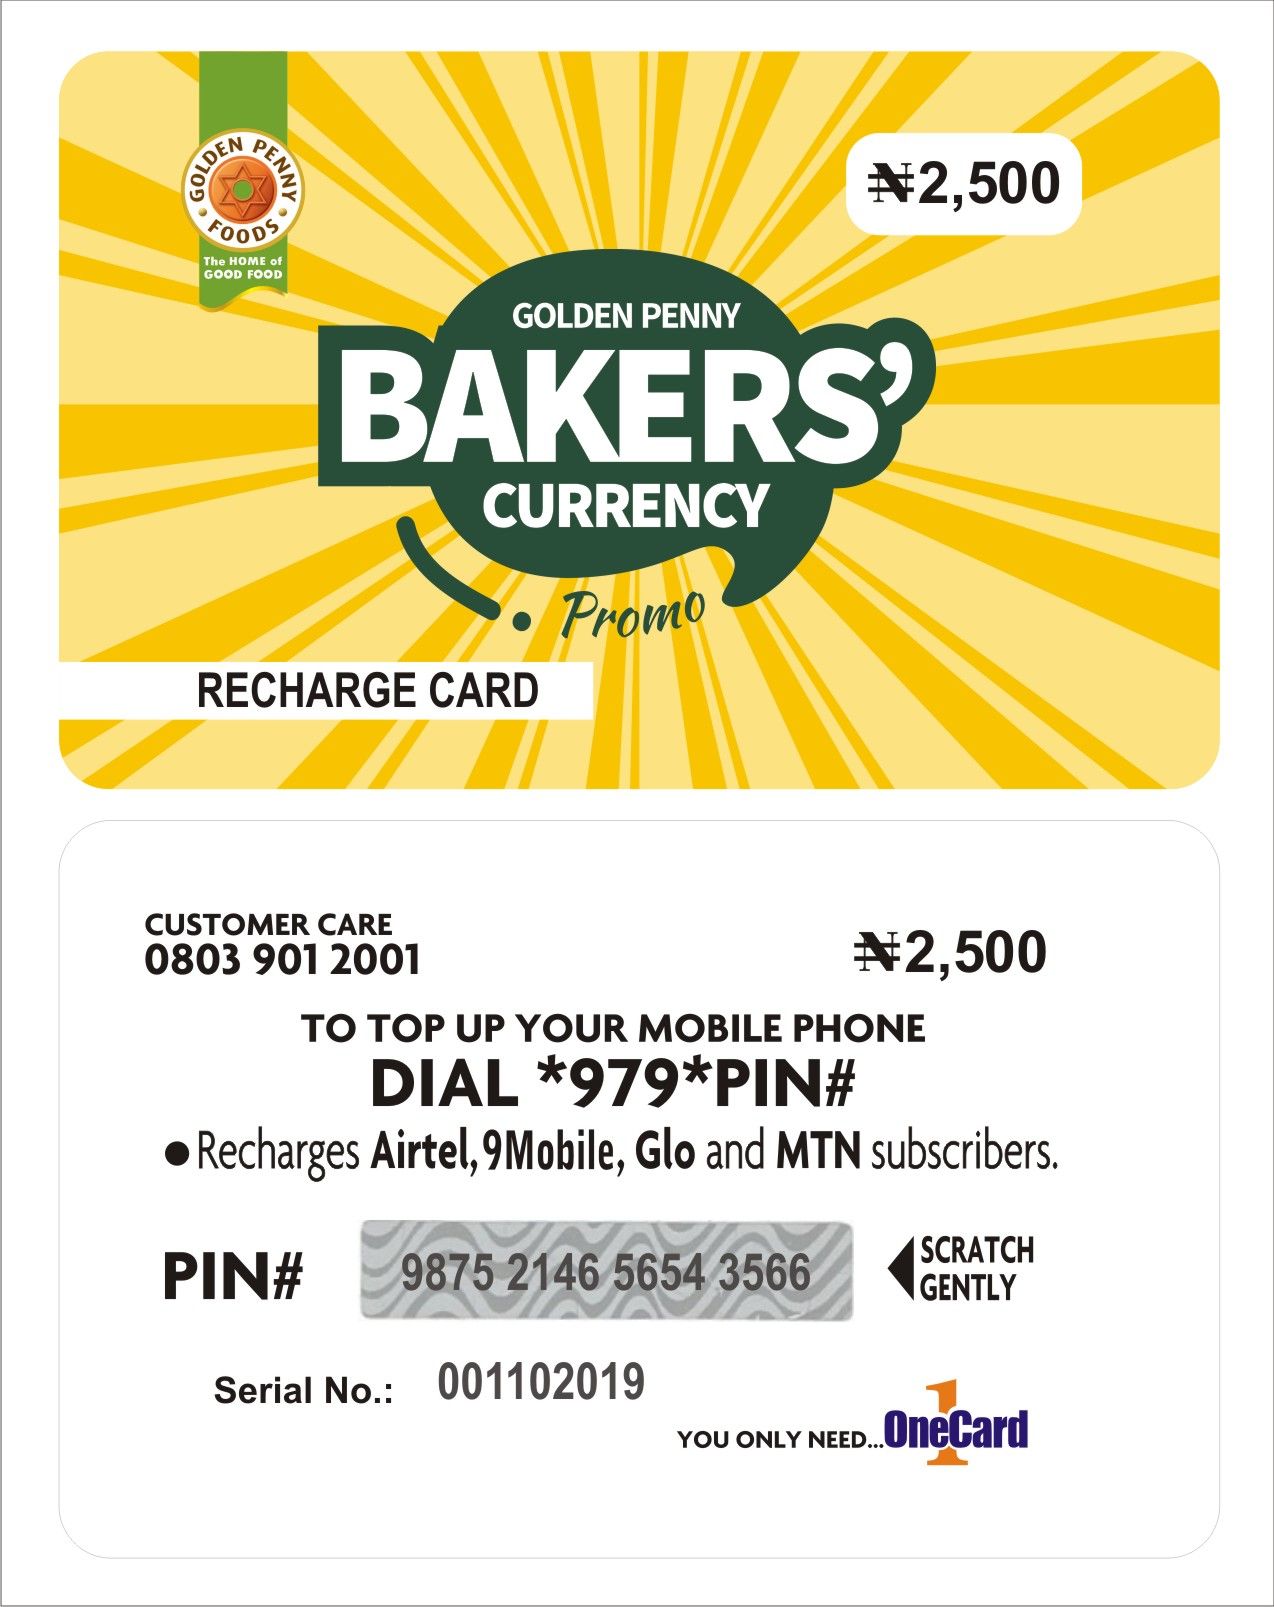 CALL CHINEDU ON 09022536974 TO PRINT SCRATCH CARDS FOR ALL PURPOSES